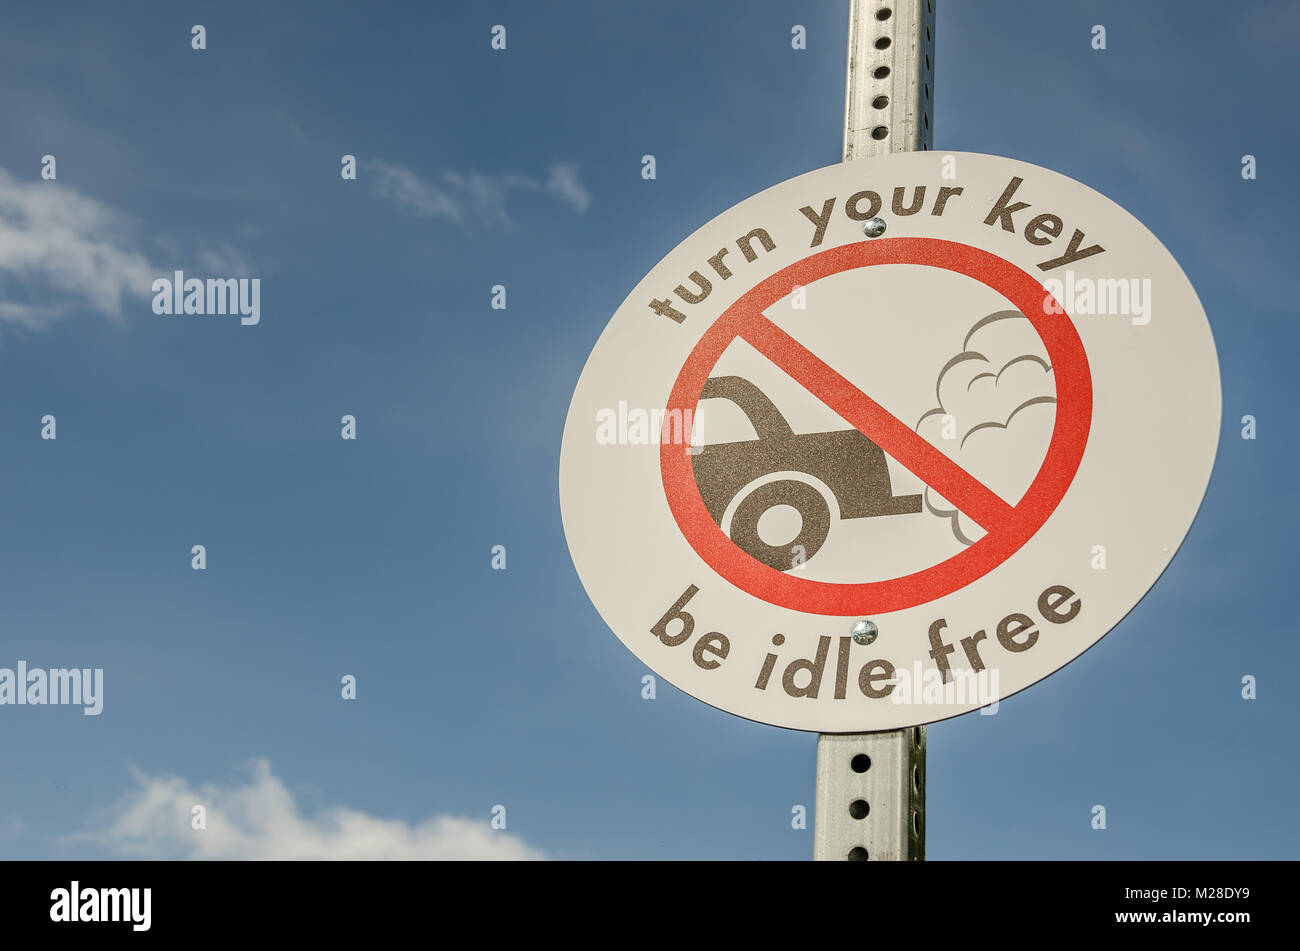 One way to help clean up our air is to turn your key and be idle free Stock Photo